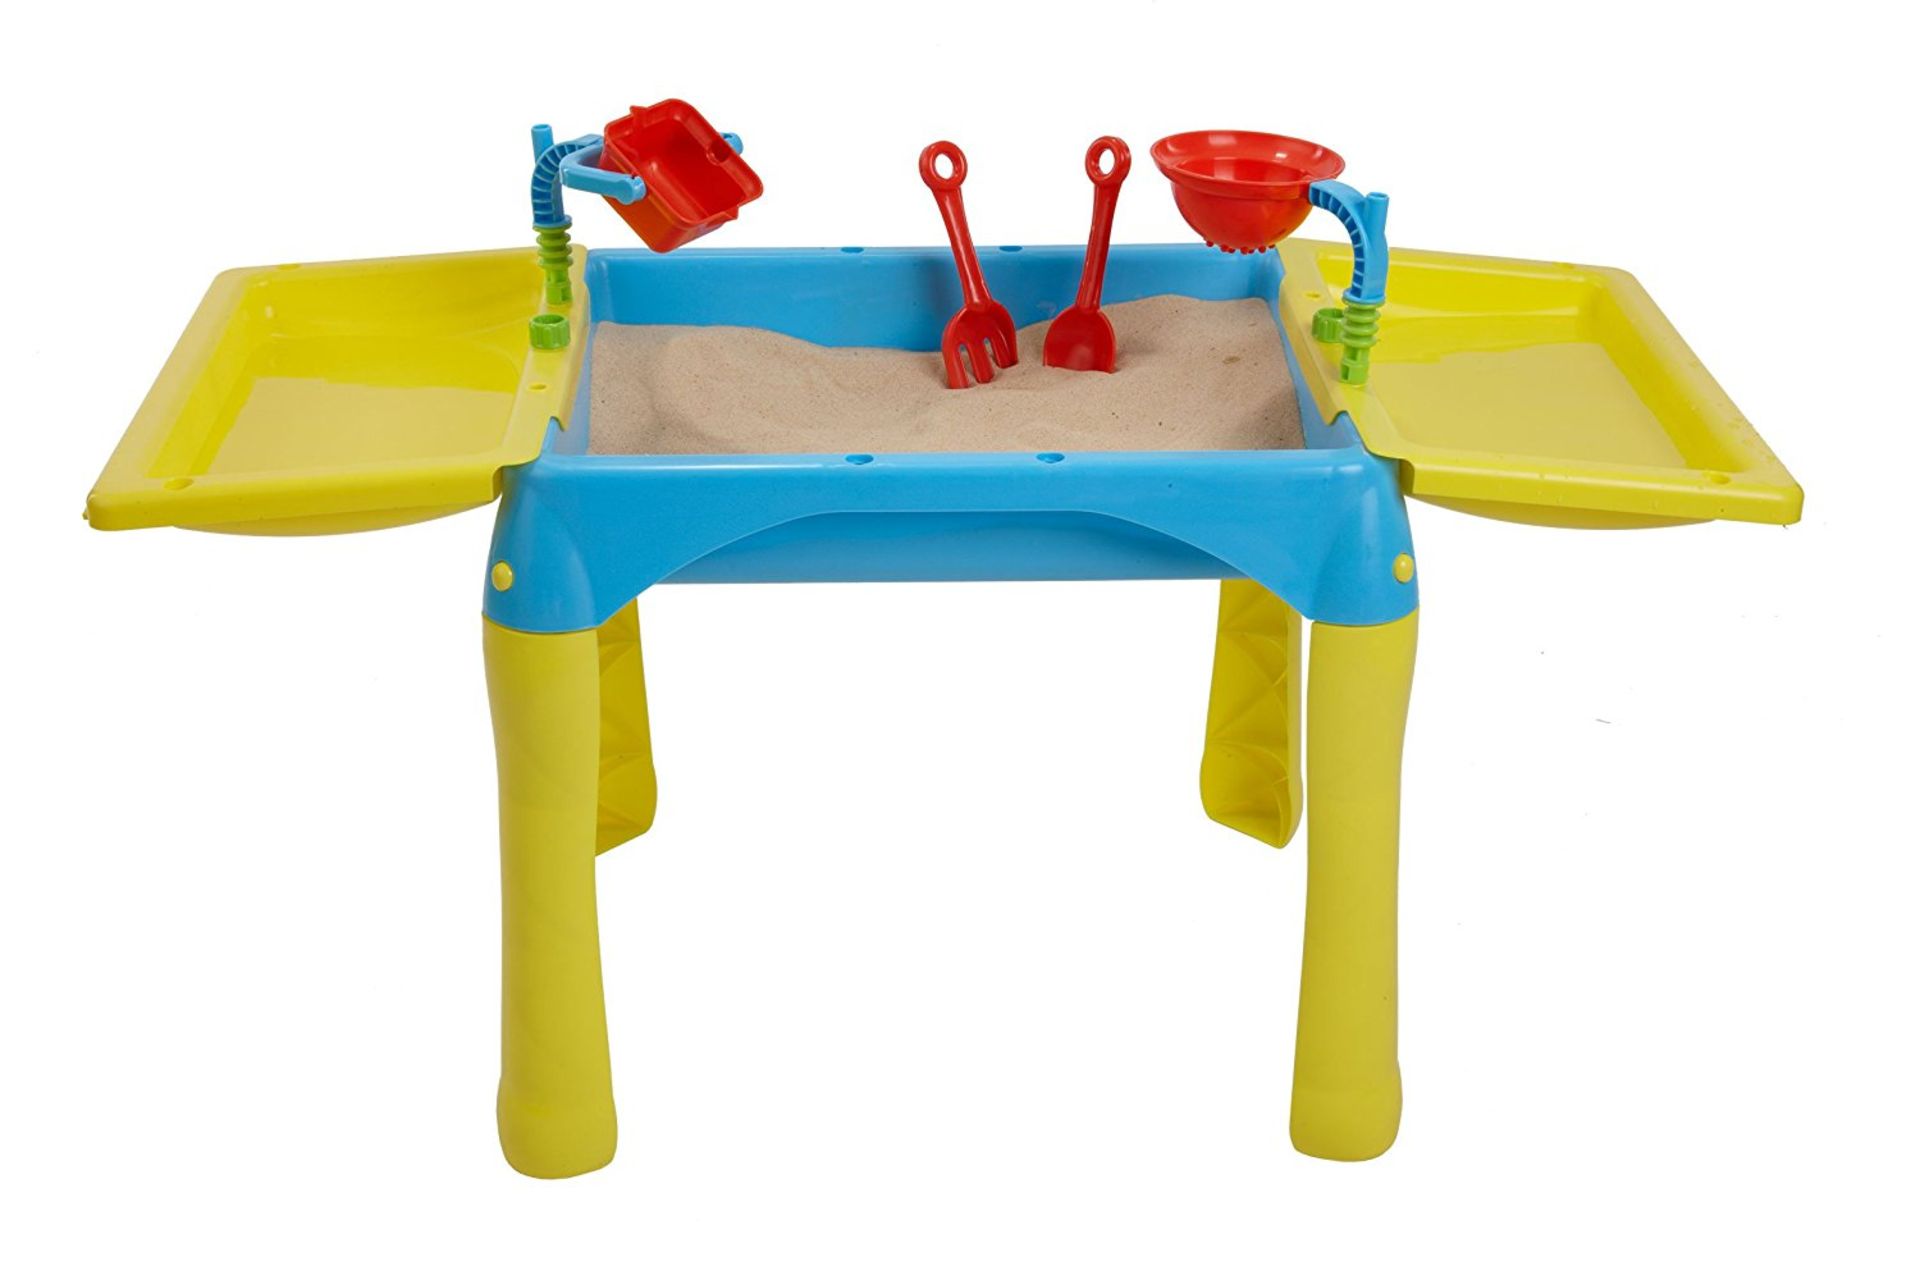 1 x Sand and Water Play Table | 5021854013522 | RRP £ 34.99